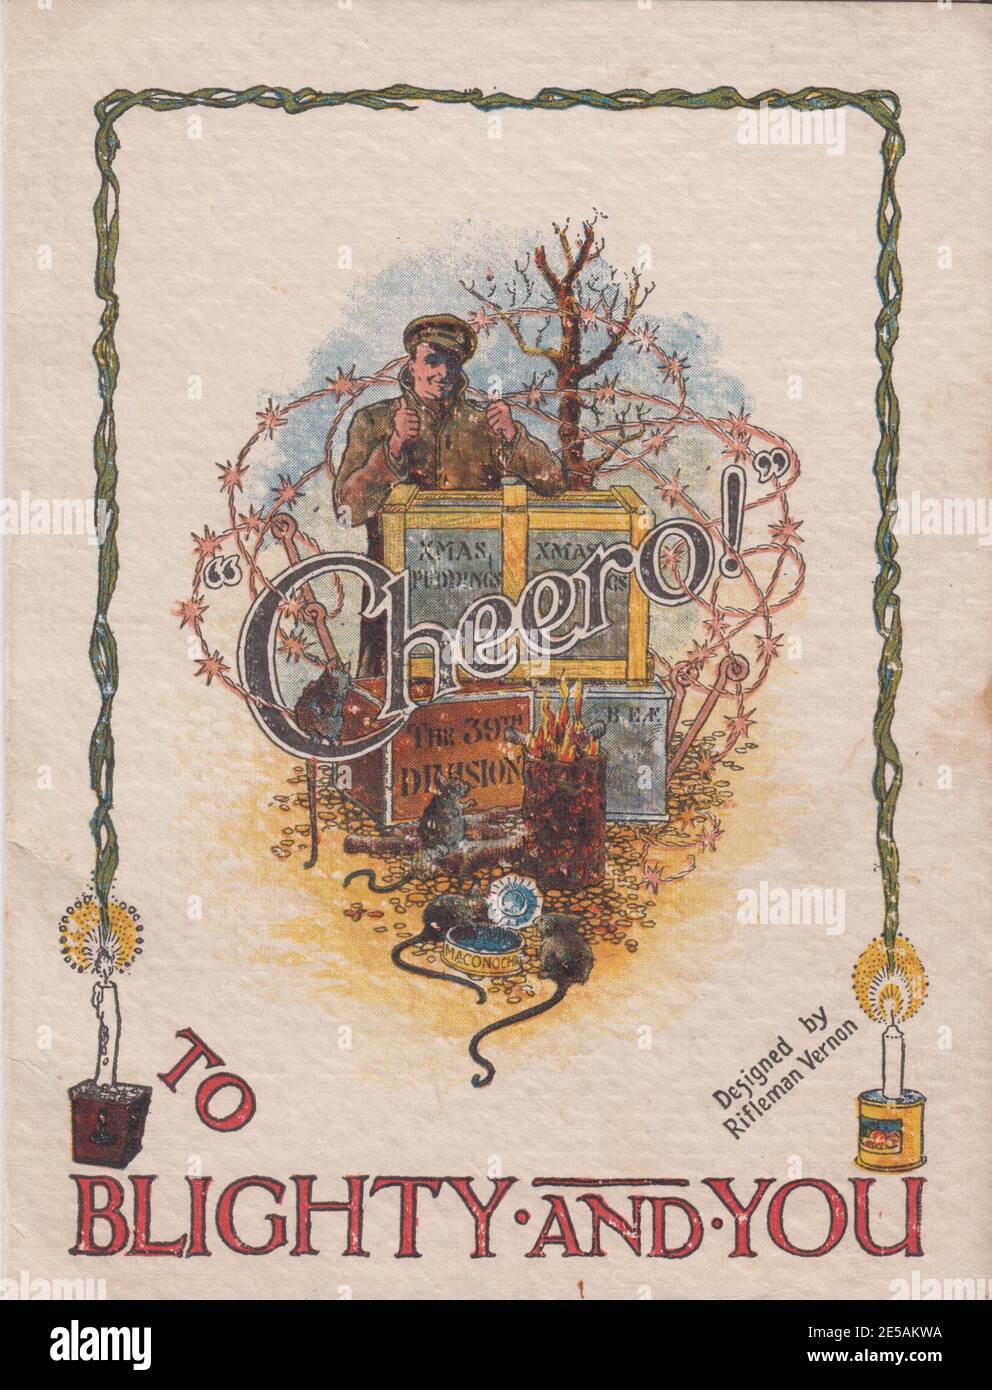 First World War Christmas card addressed to Blighty and You, from the 39th Division of the British Expeditionary Force, 1917. The colour illustration shows a smiling soldier with both thumbs up behind cases of Christmas puddings, rats are eating from a tin and standing by a fire in the foreground and there is barbed wire in the background Stock Photo